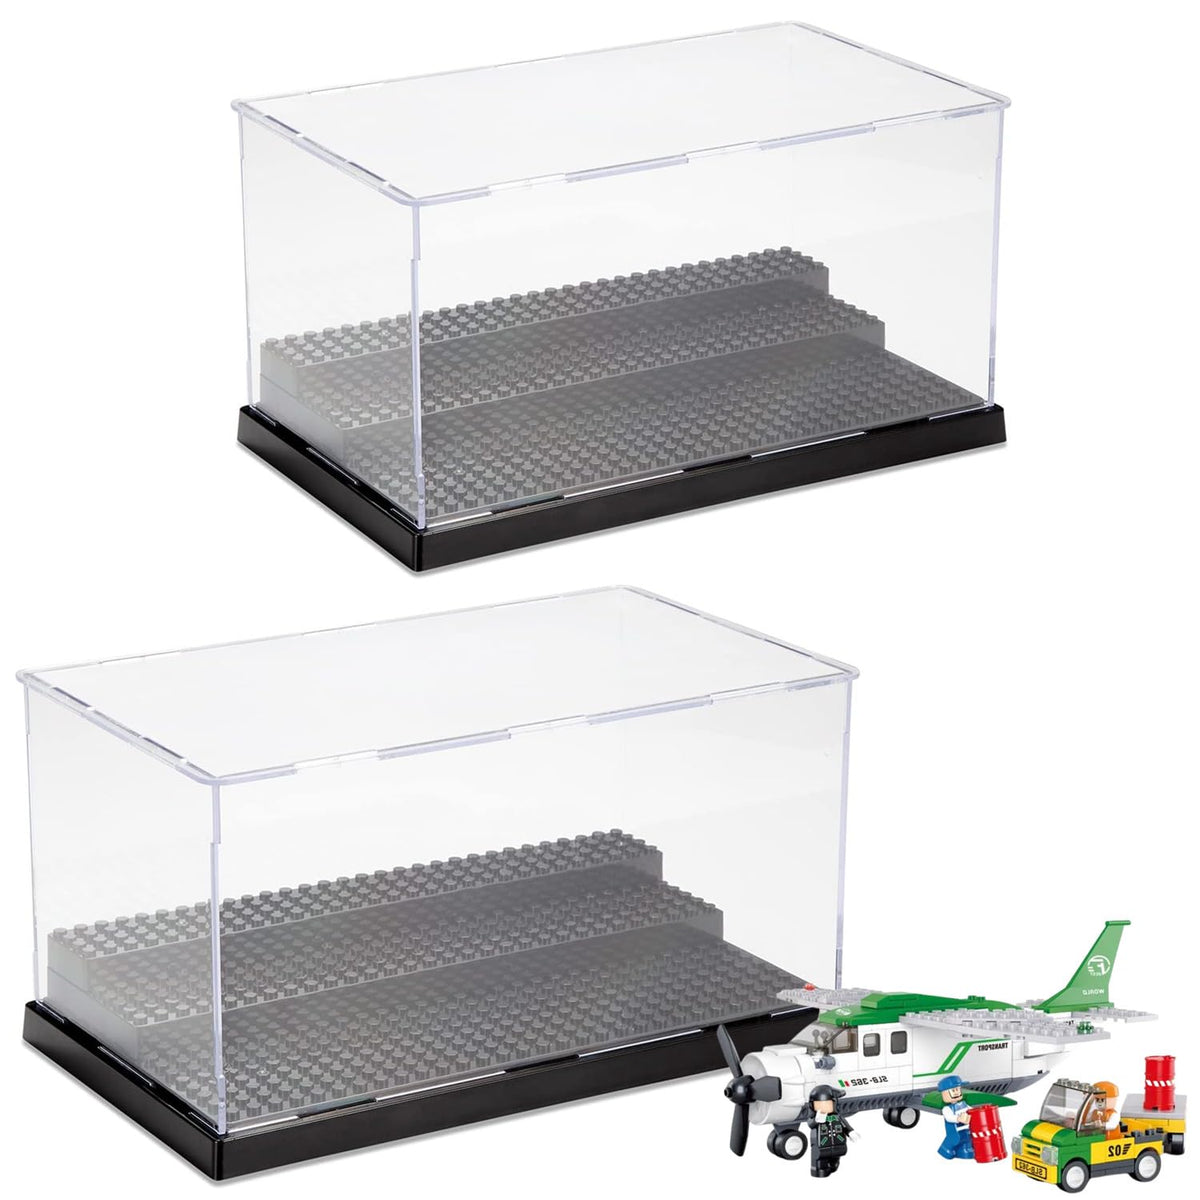 RHBLME 2 Pack Display Case for Minifigures Action Figures Blocks, Clear & Dustproof Acrylic Minifigure Display Case Box Storage with 3 Movable Steps, Figure Display Case for Lego Lovers